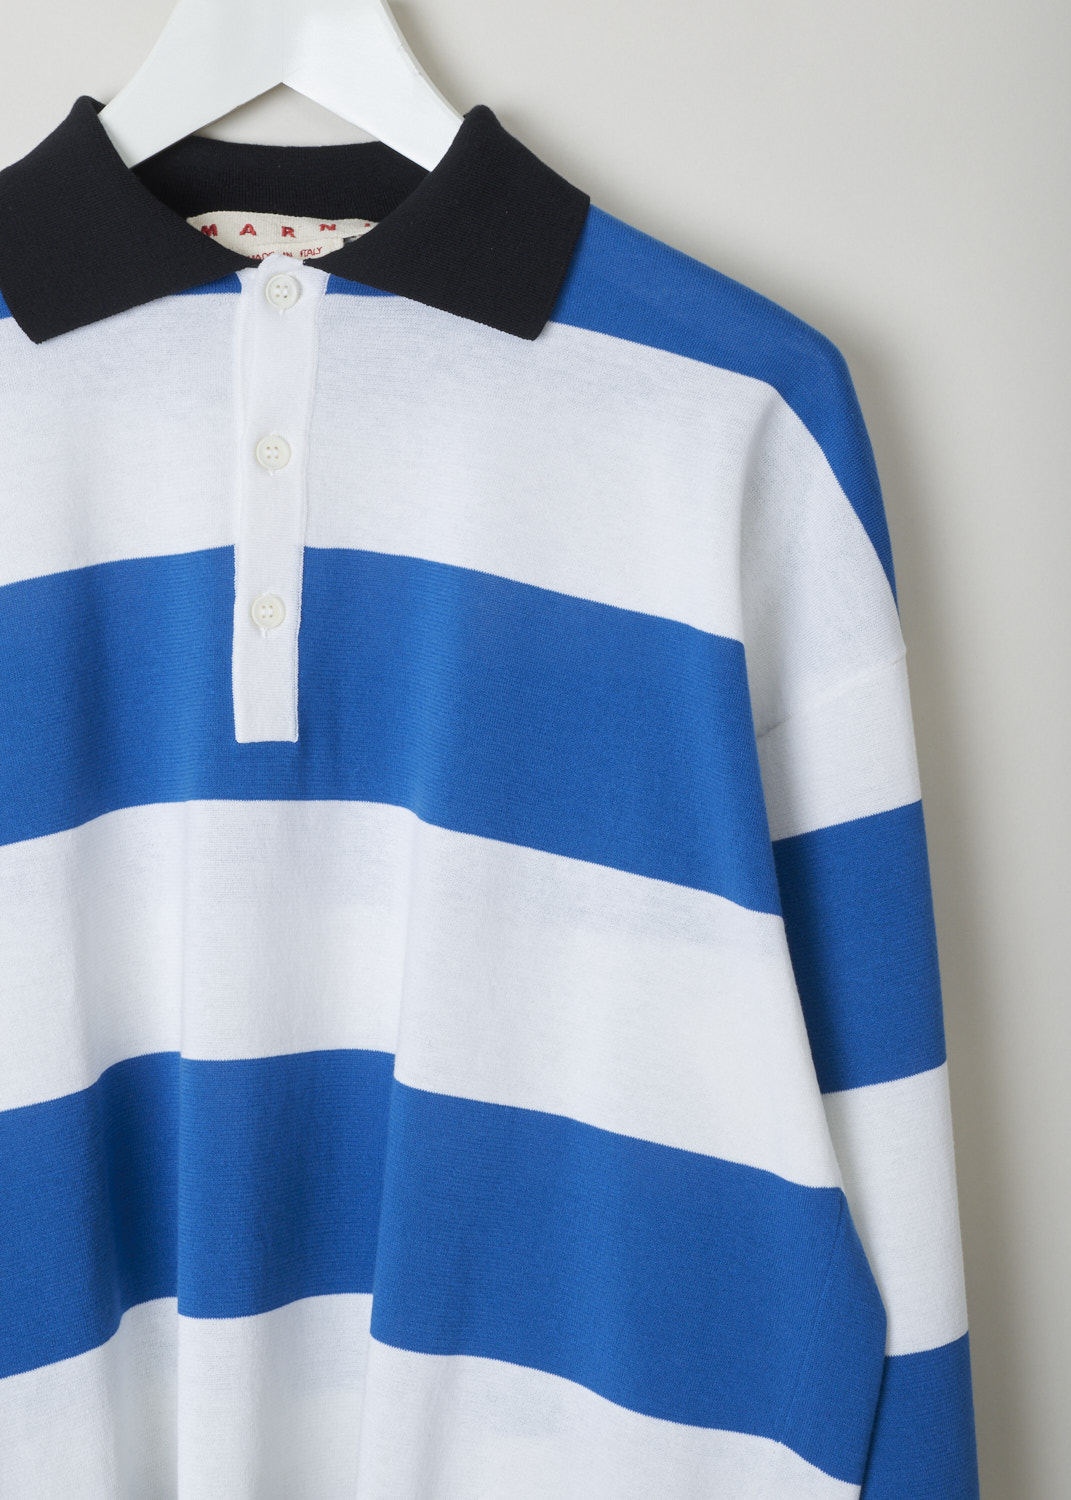 Marni, Horizontally striped long sleeve polo, POMD0029Q0_UFC912_MSB54, blue white, print, detail, This long sleeve polo is designed with an oversized fit in mind and comes adorned with lovely horizontal stripes in blue and white. The pointed collar, hem and the cuffs are all coloured to a darker shade of blue.  